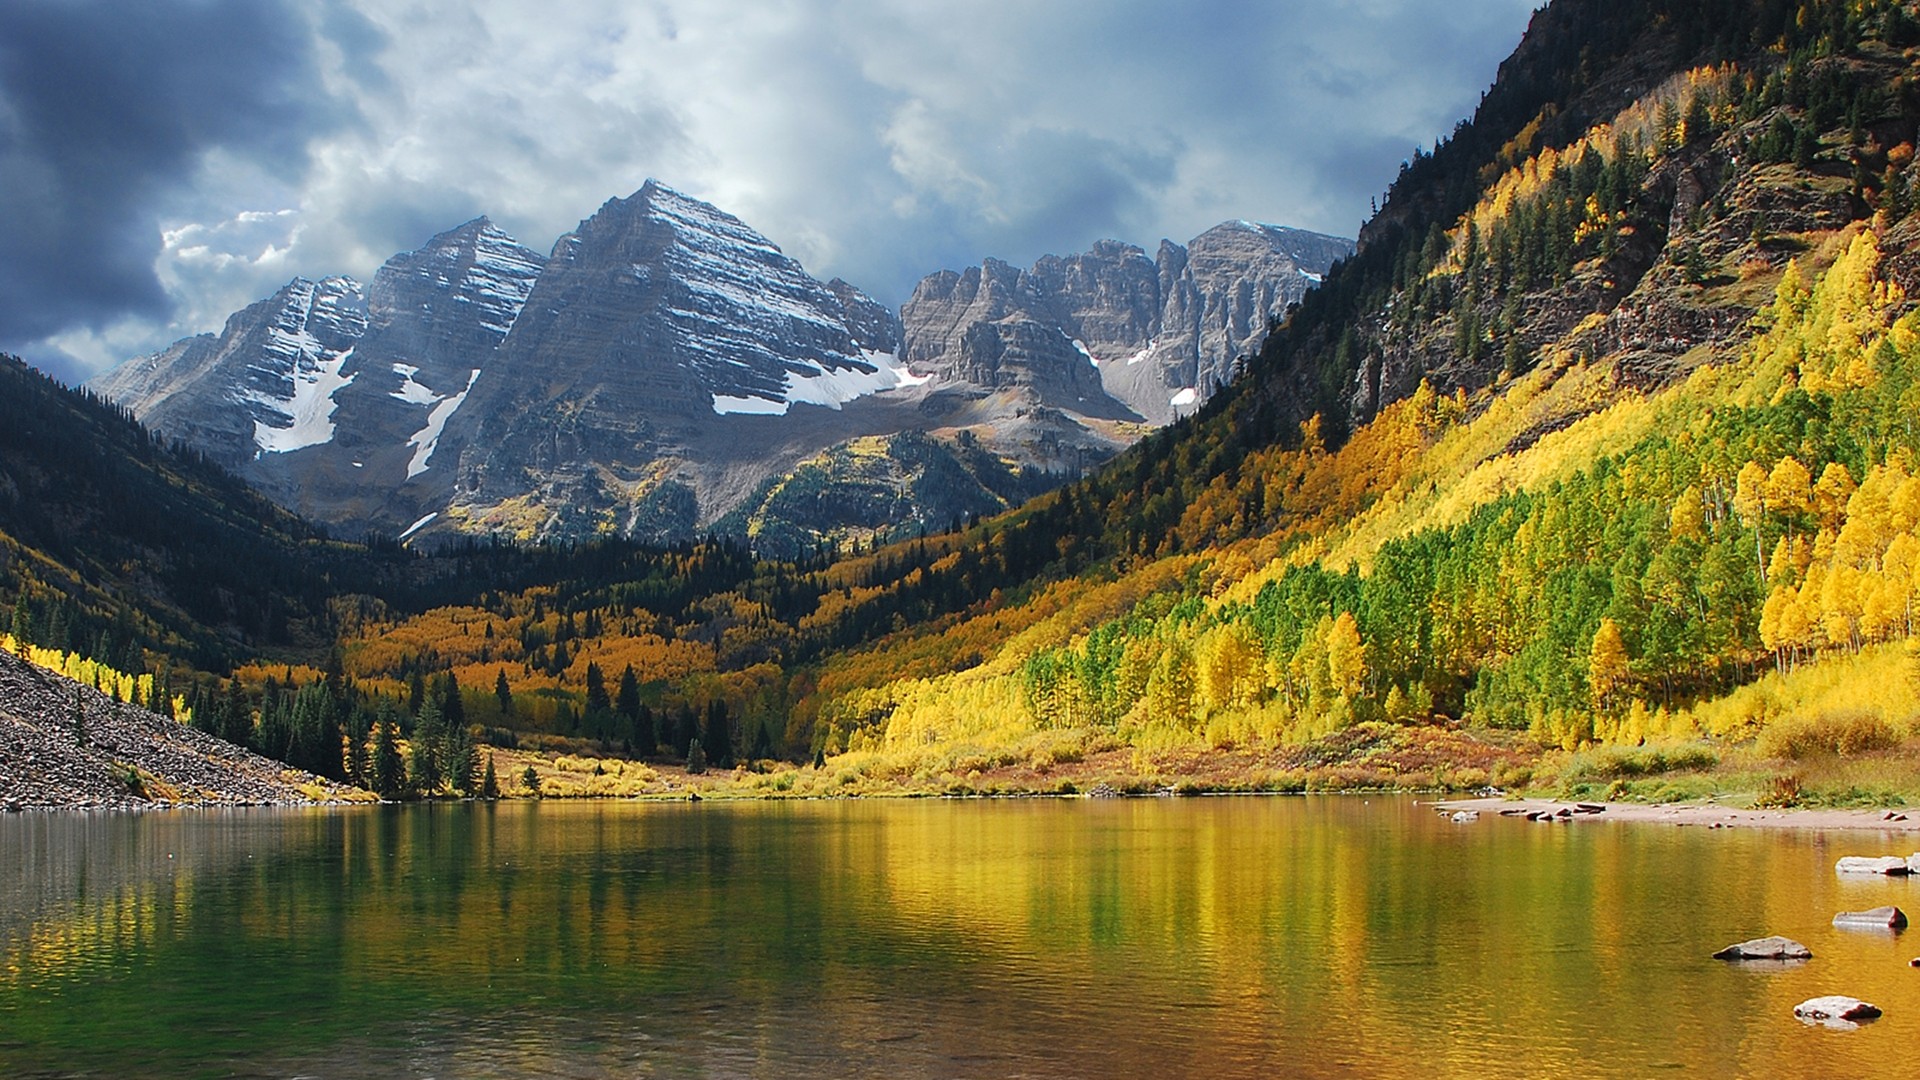 Hd Wallpapers Maroon Bell Mountain Colorado Lake Nature 1920 X 1080